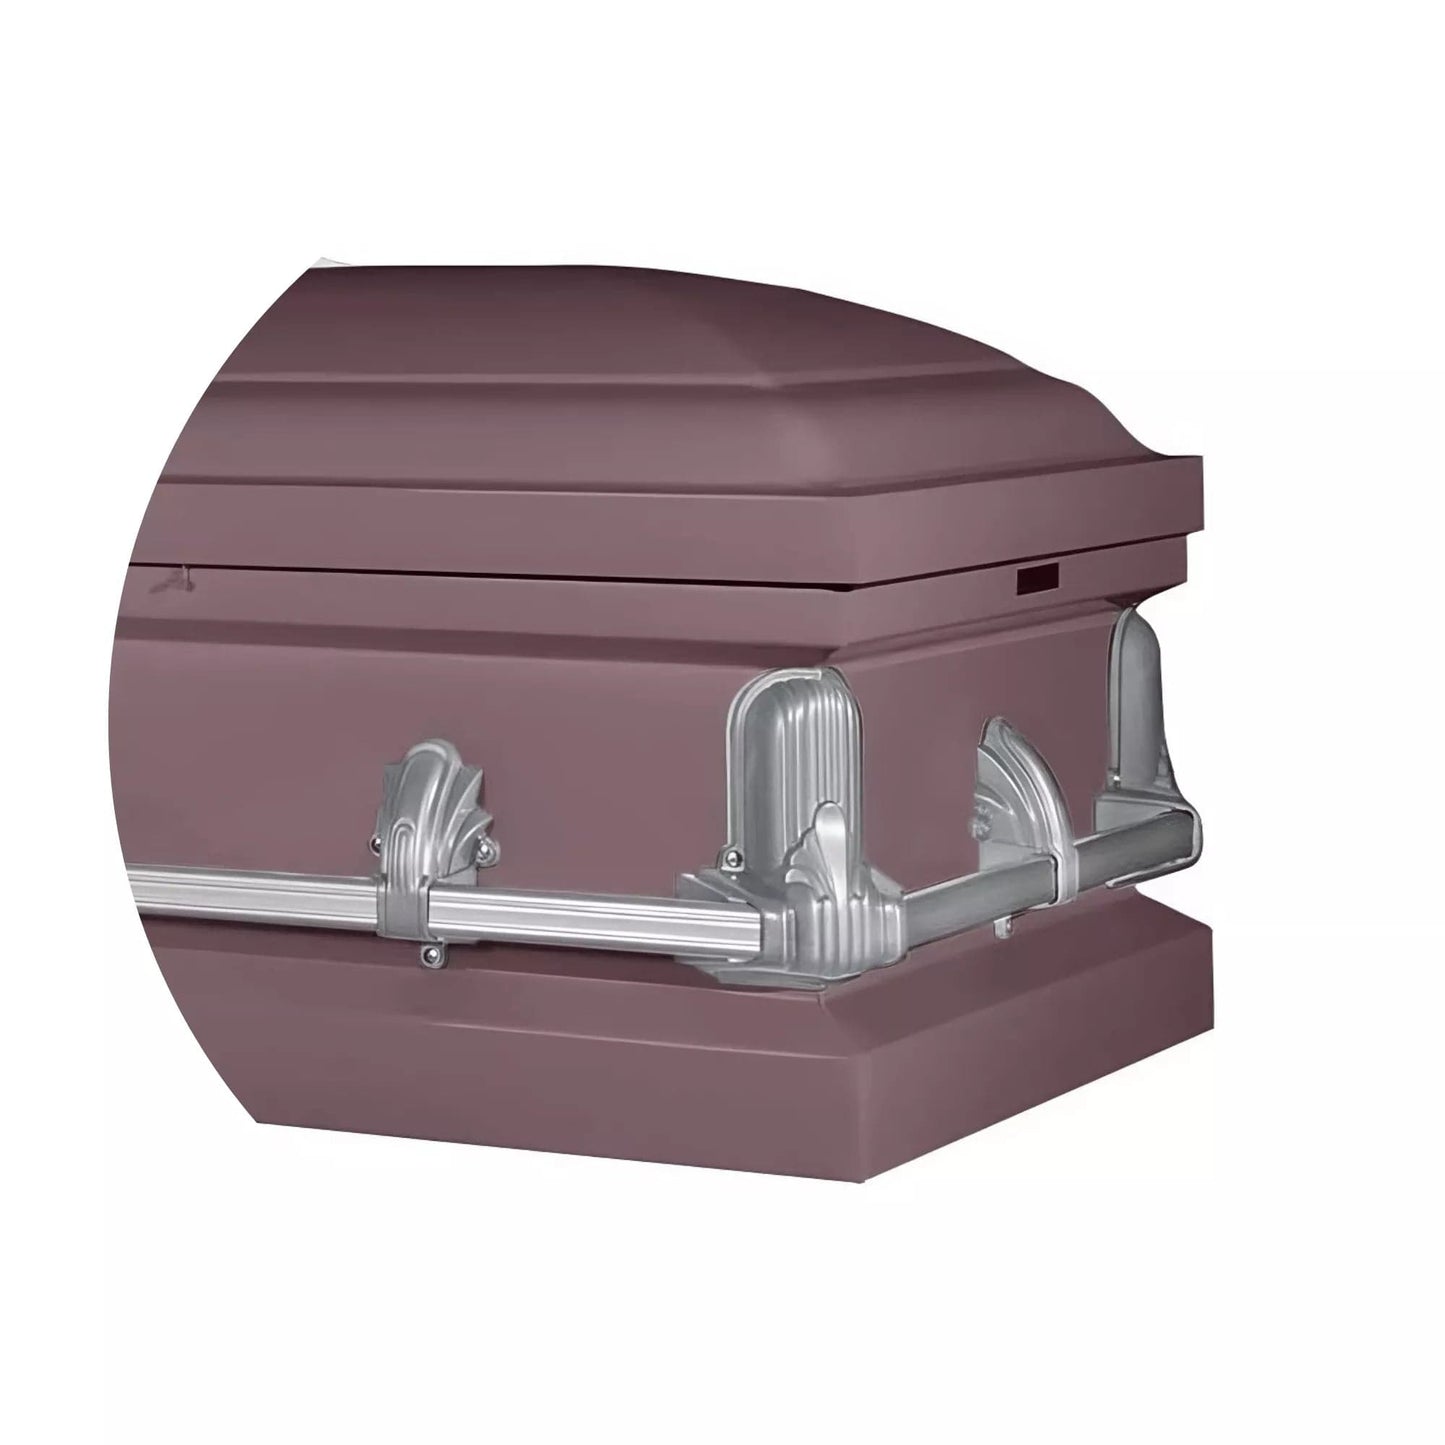 Andover Series | Orchid Steel Casket with White Interior